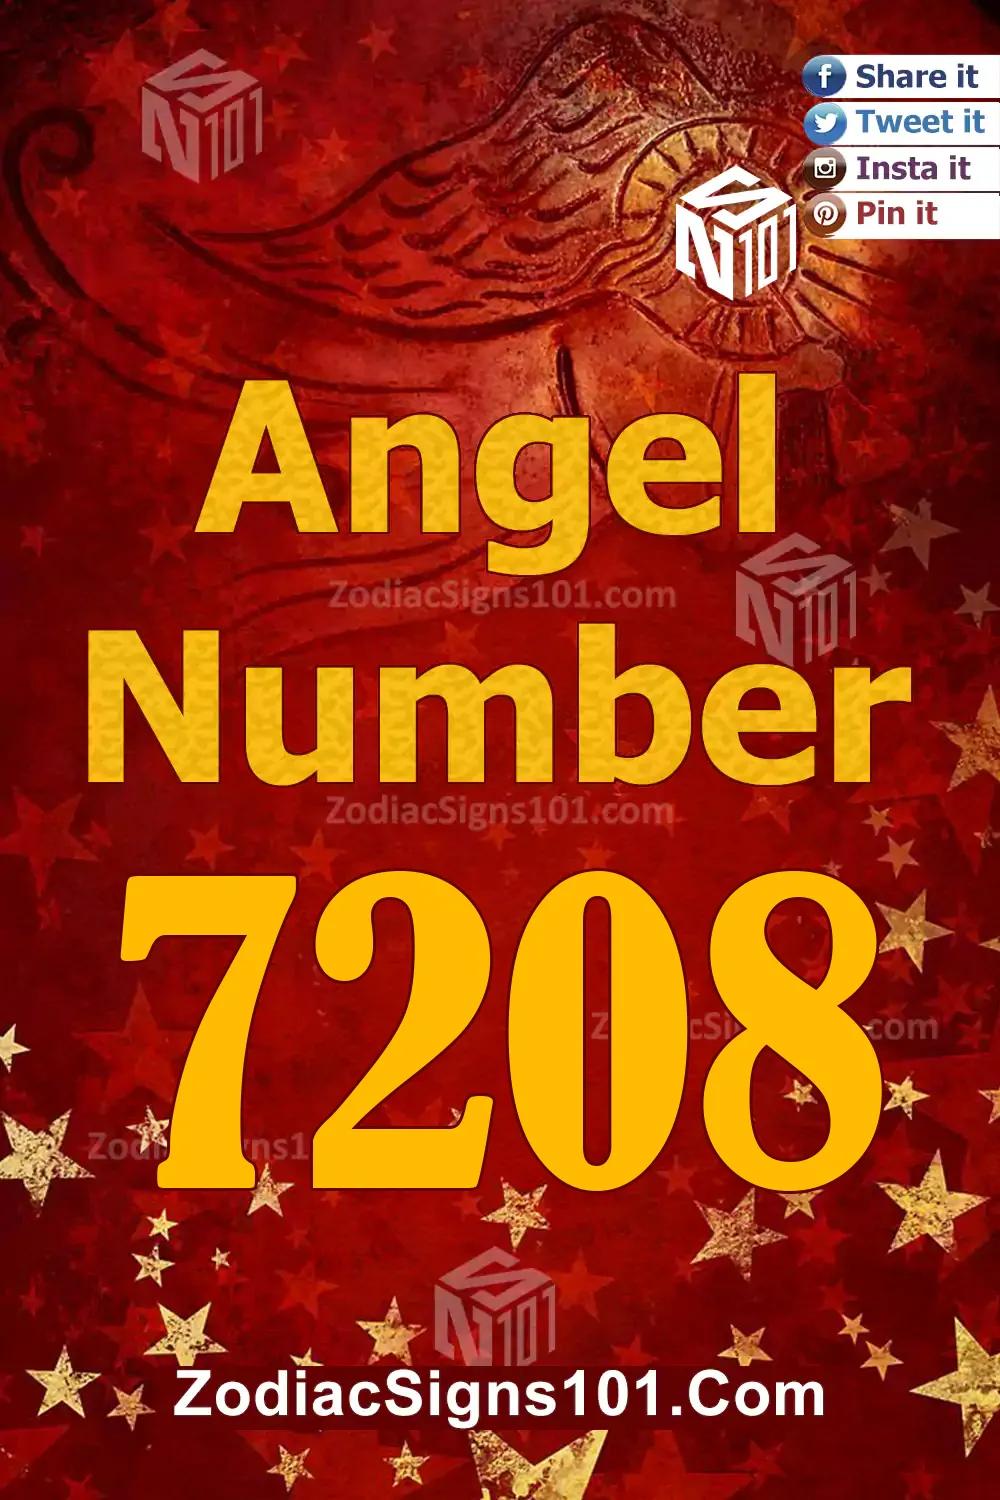 7208 Angel Number Meaning